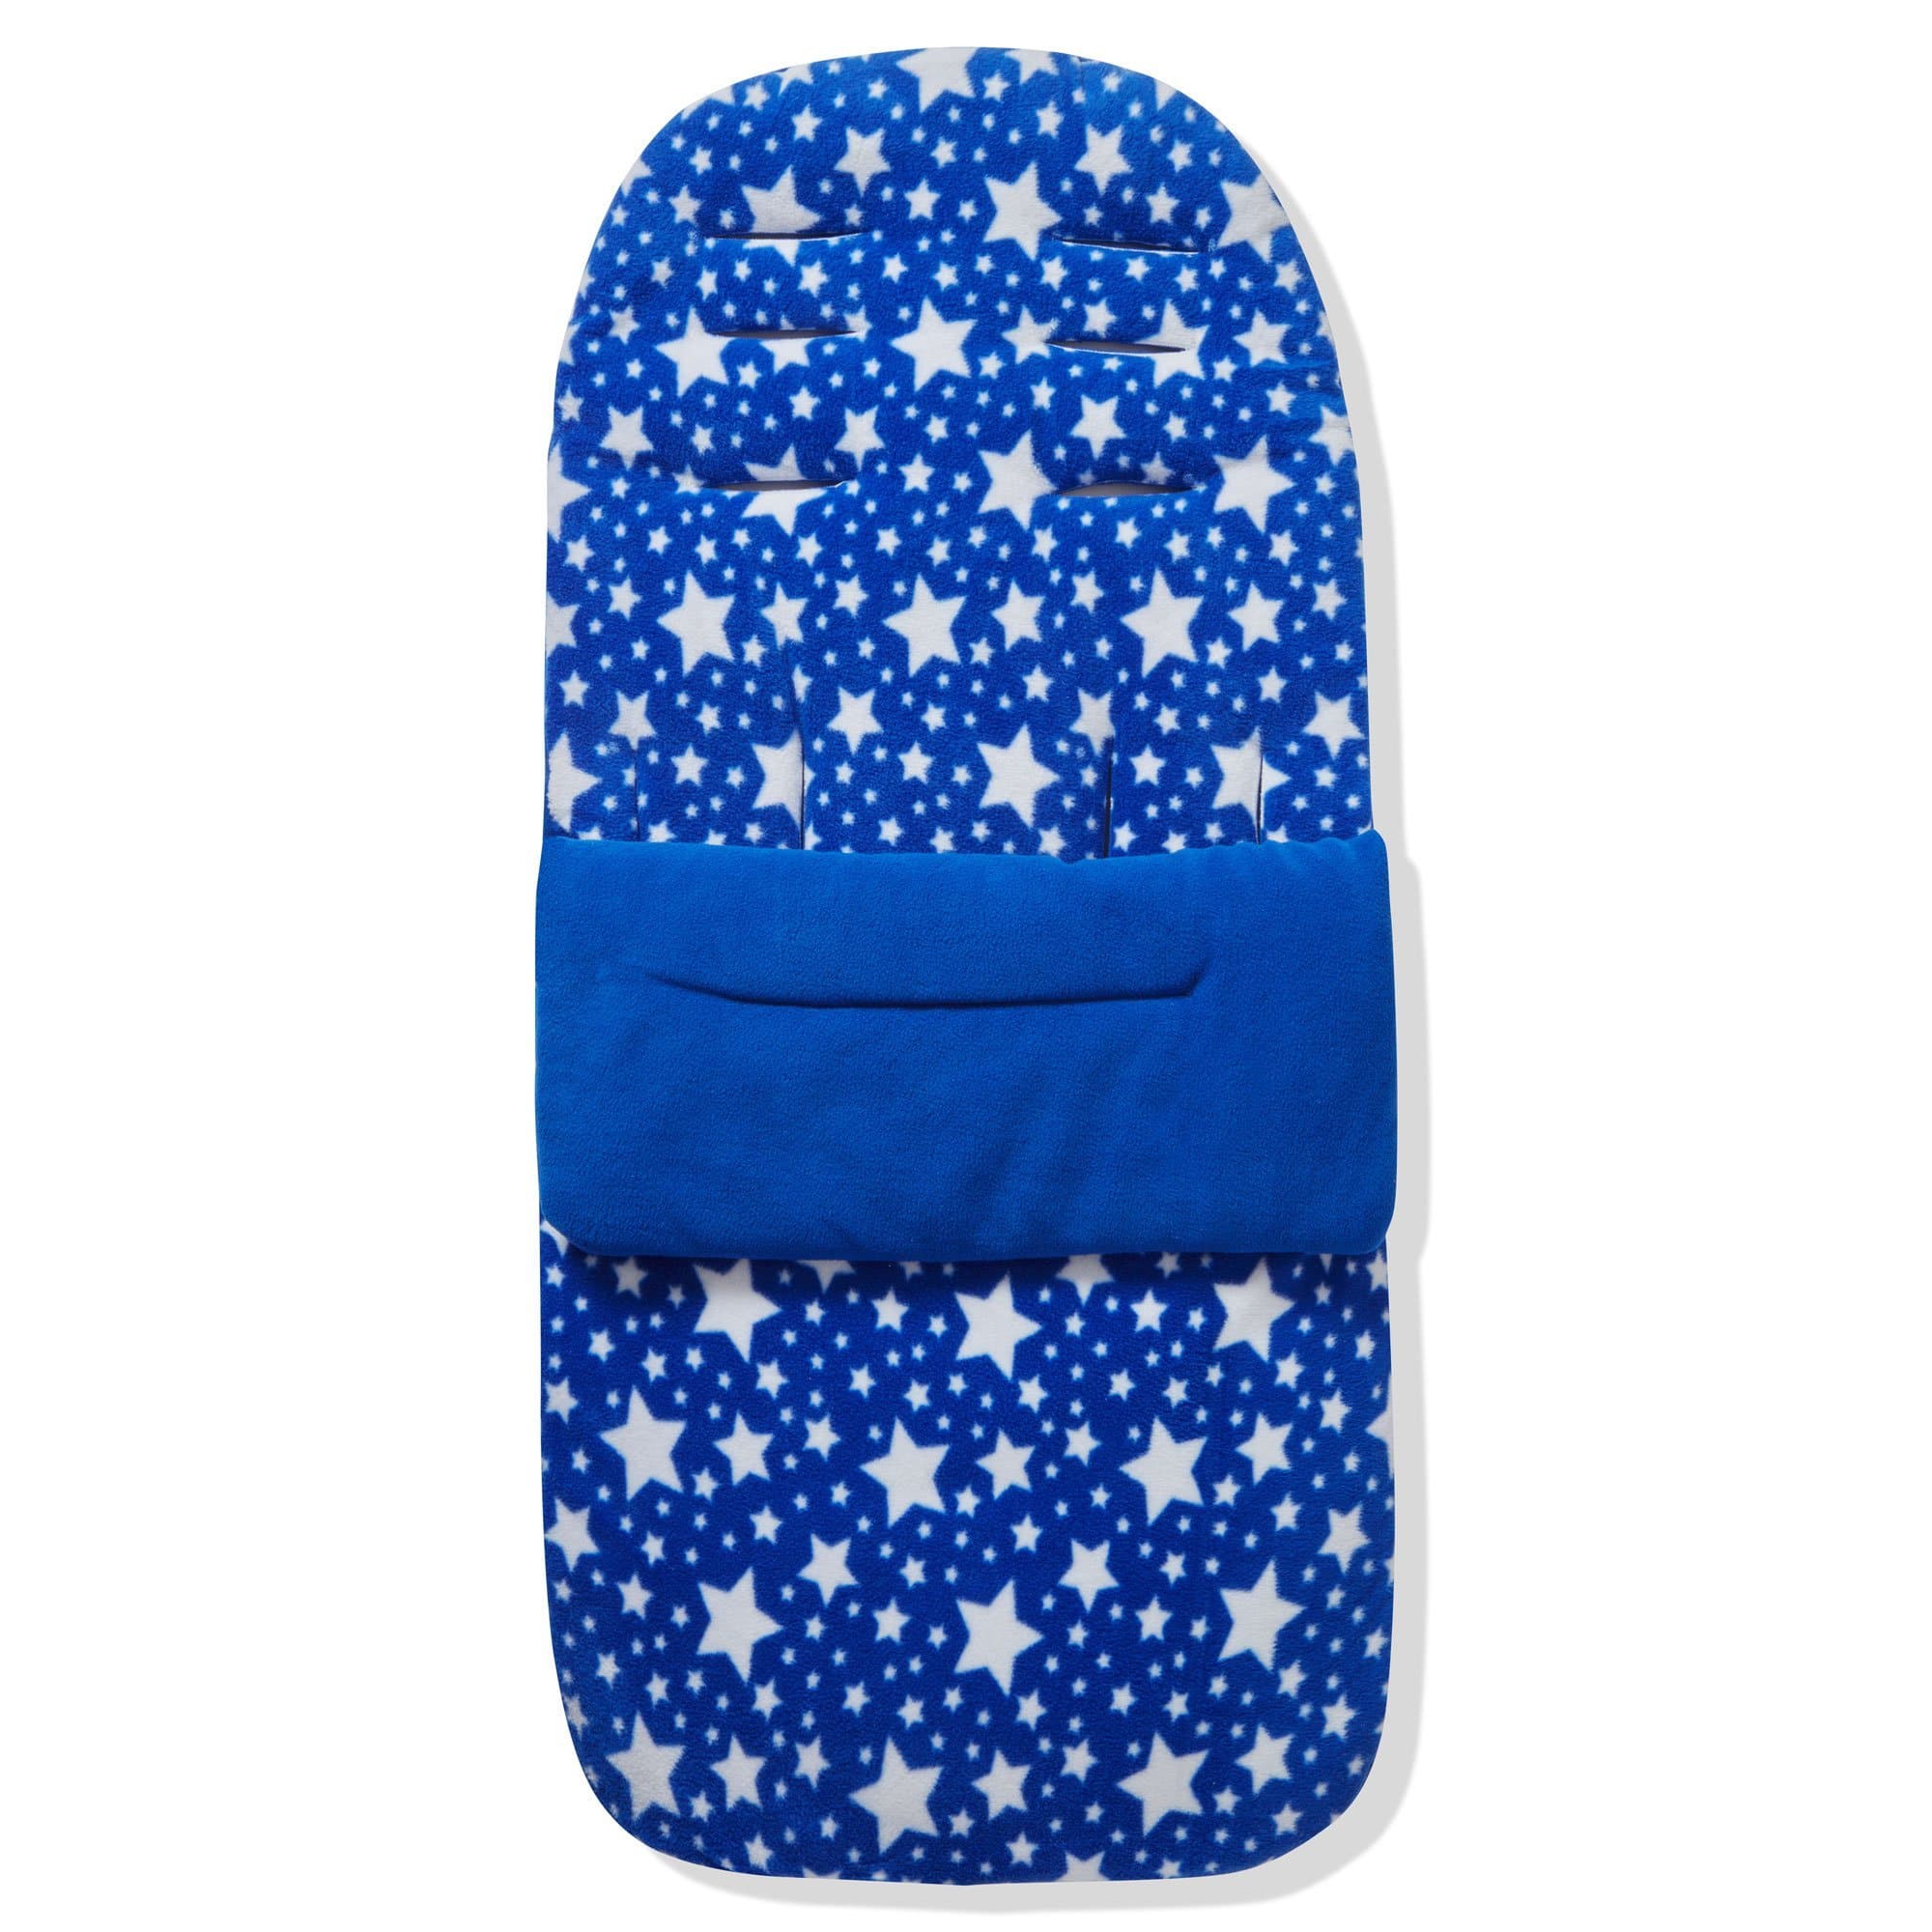 Fleece Footmuff / Cosy Toes Compatible with Pericles - Blue Star / Fits All Models | For Your Little One